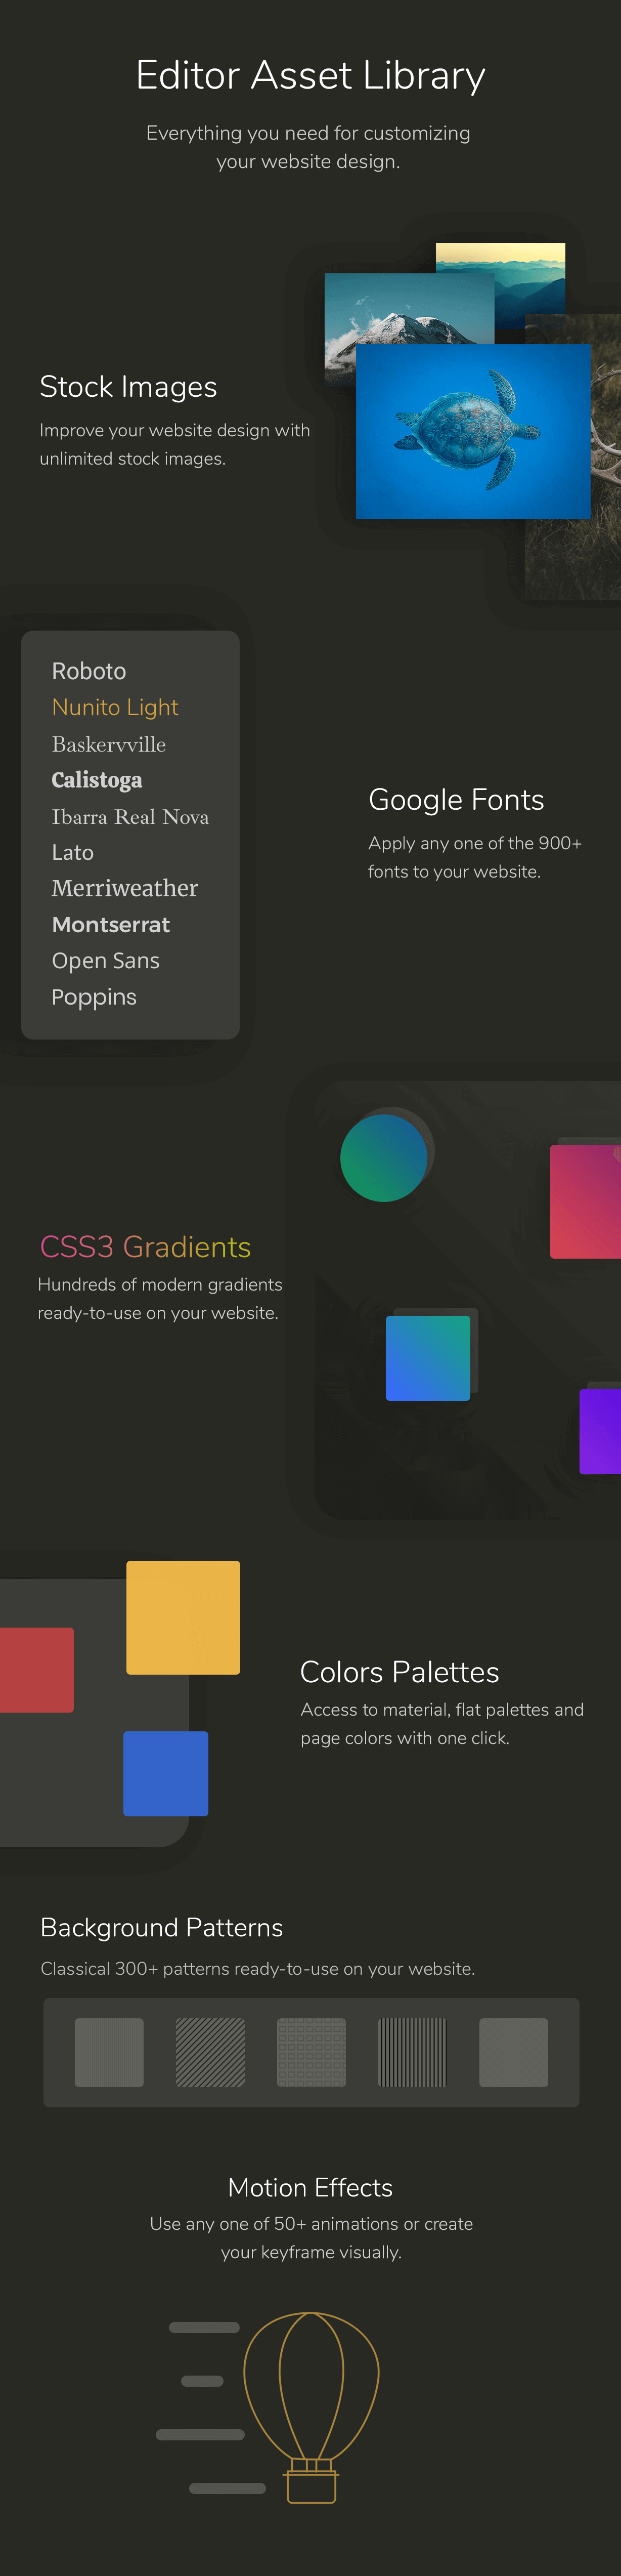 YellowPencil - Visual CSS Style Editor - 5